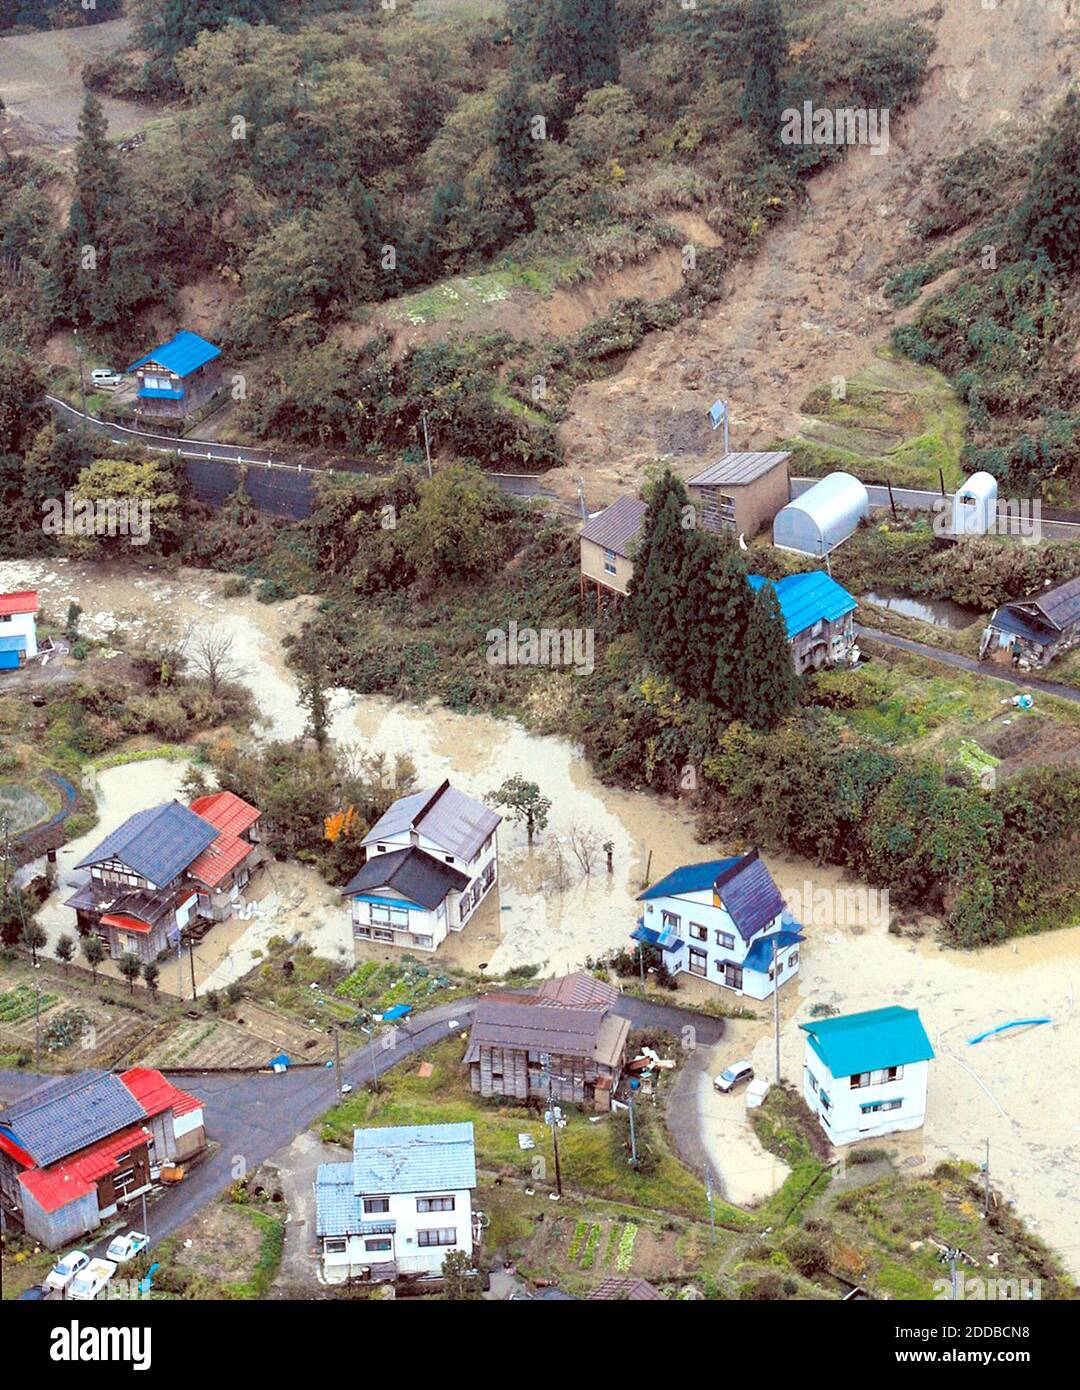 NO FILM, NO VIDEO, NO TV, NO DOCUMENTARY - Quake-stricken Yamakoshimura, Niigata Prefecture, is flooded Tuesday morning, October 26, 2004, after heavy rainfall overnight. The flooding occurred after the deadliest earthquake to hit the country in nearly a decade, on October 23, measured 6.8 and killed 31. Photo by Yomiuri Shimbun/KRT/ABACA. Stock Photo